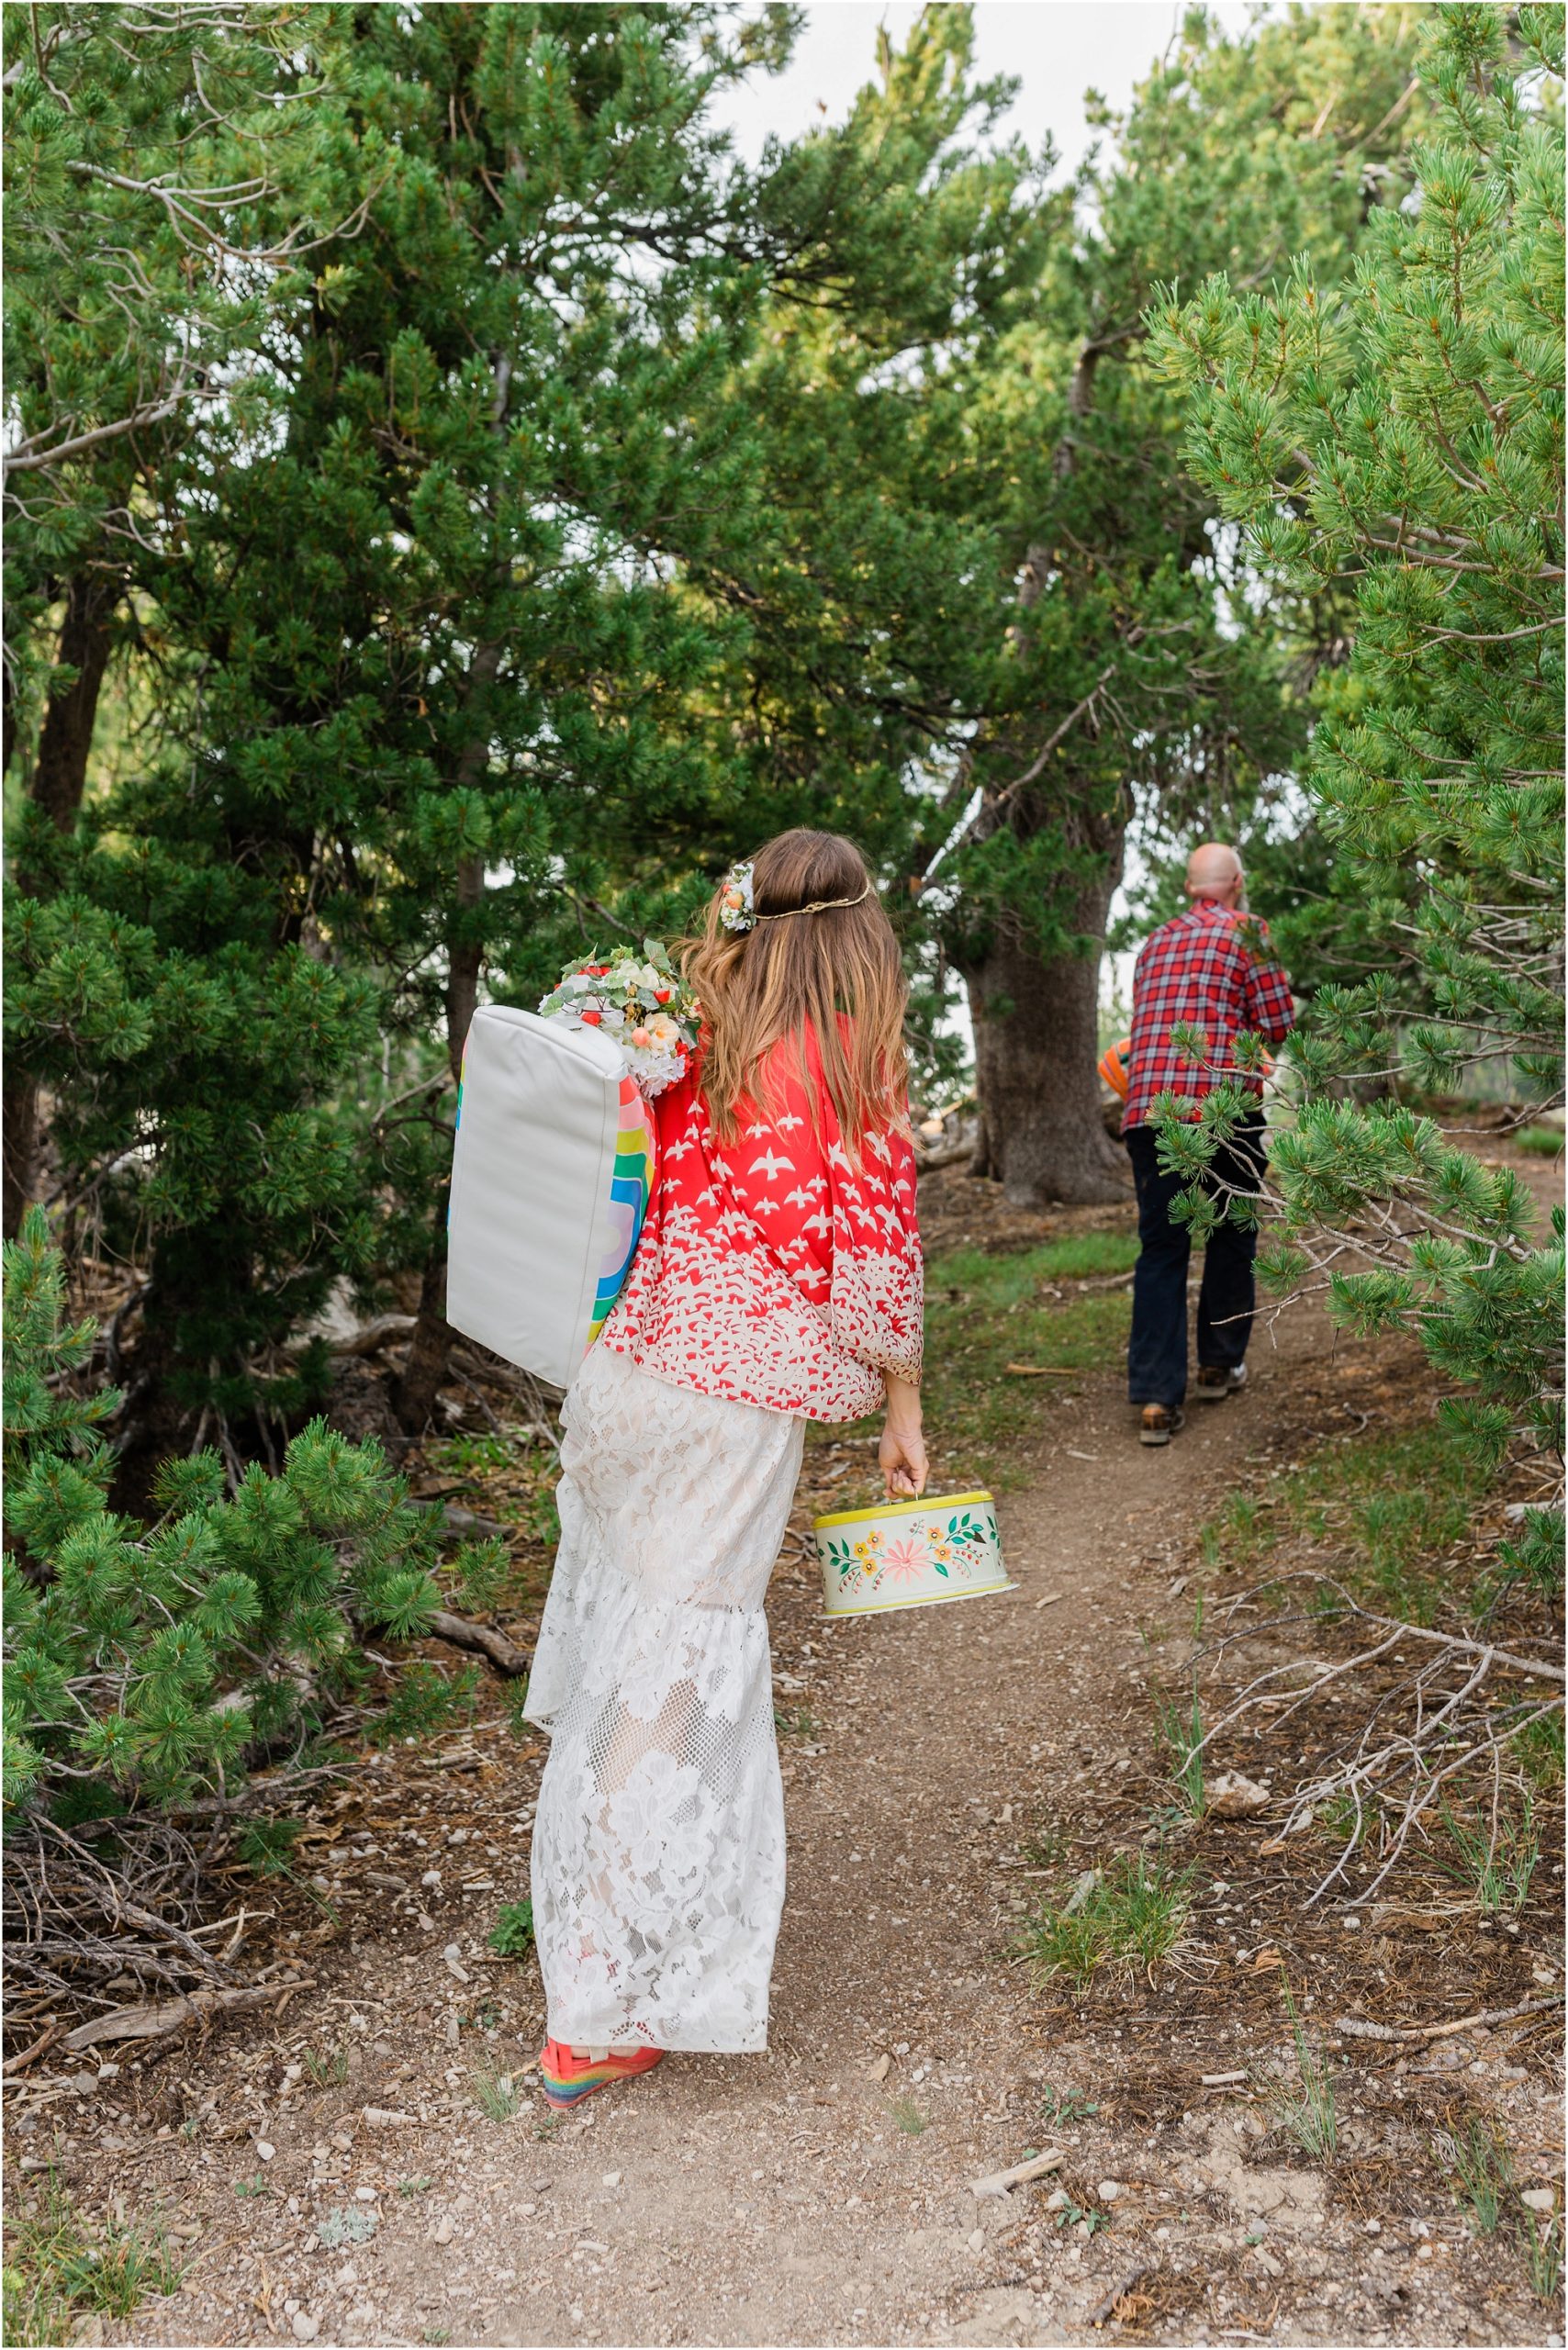 A boho bride, wearing a bright red shawl, carries a rainbow bag and vintage metal cake carrier to set up her celebratory picnic in the trees surrounding Cloud Cap Overlook for her Crater Lake Elopement in Oregon. | Erica Swantek Photography